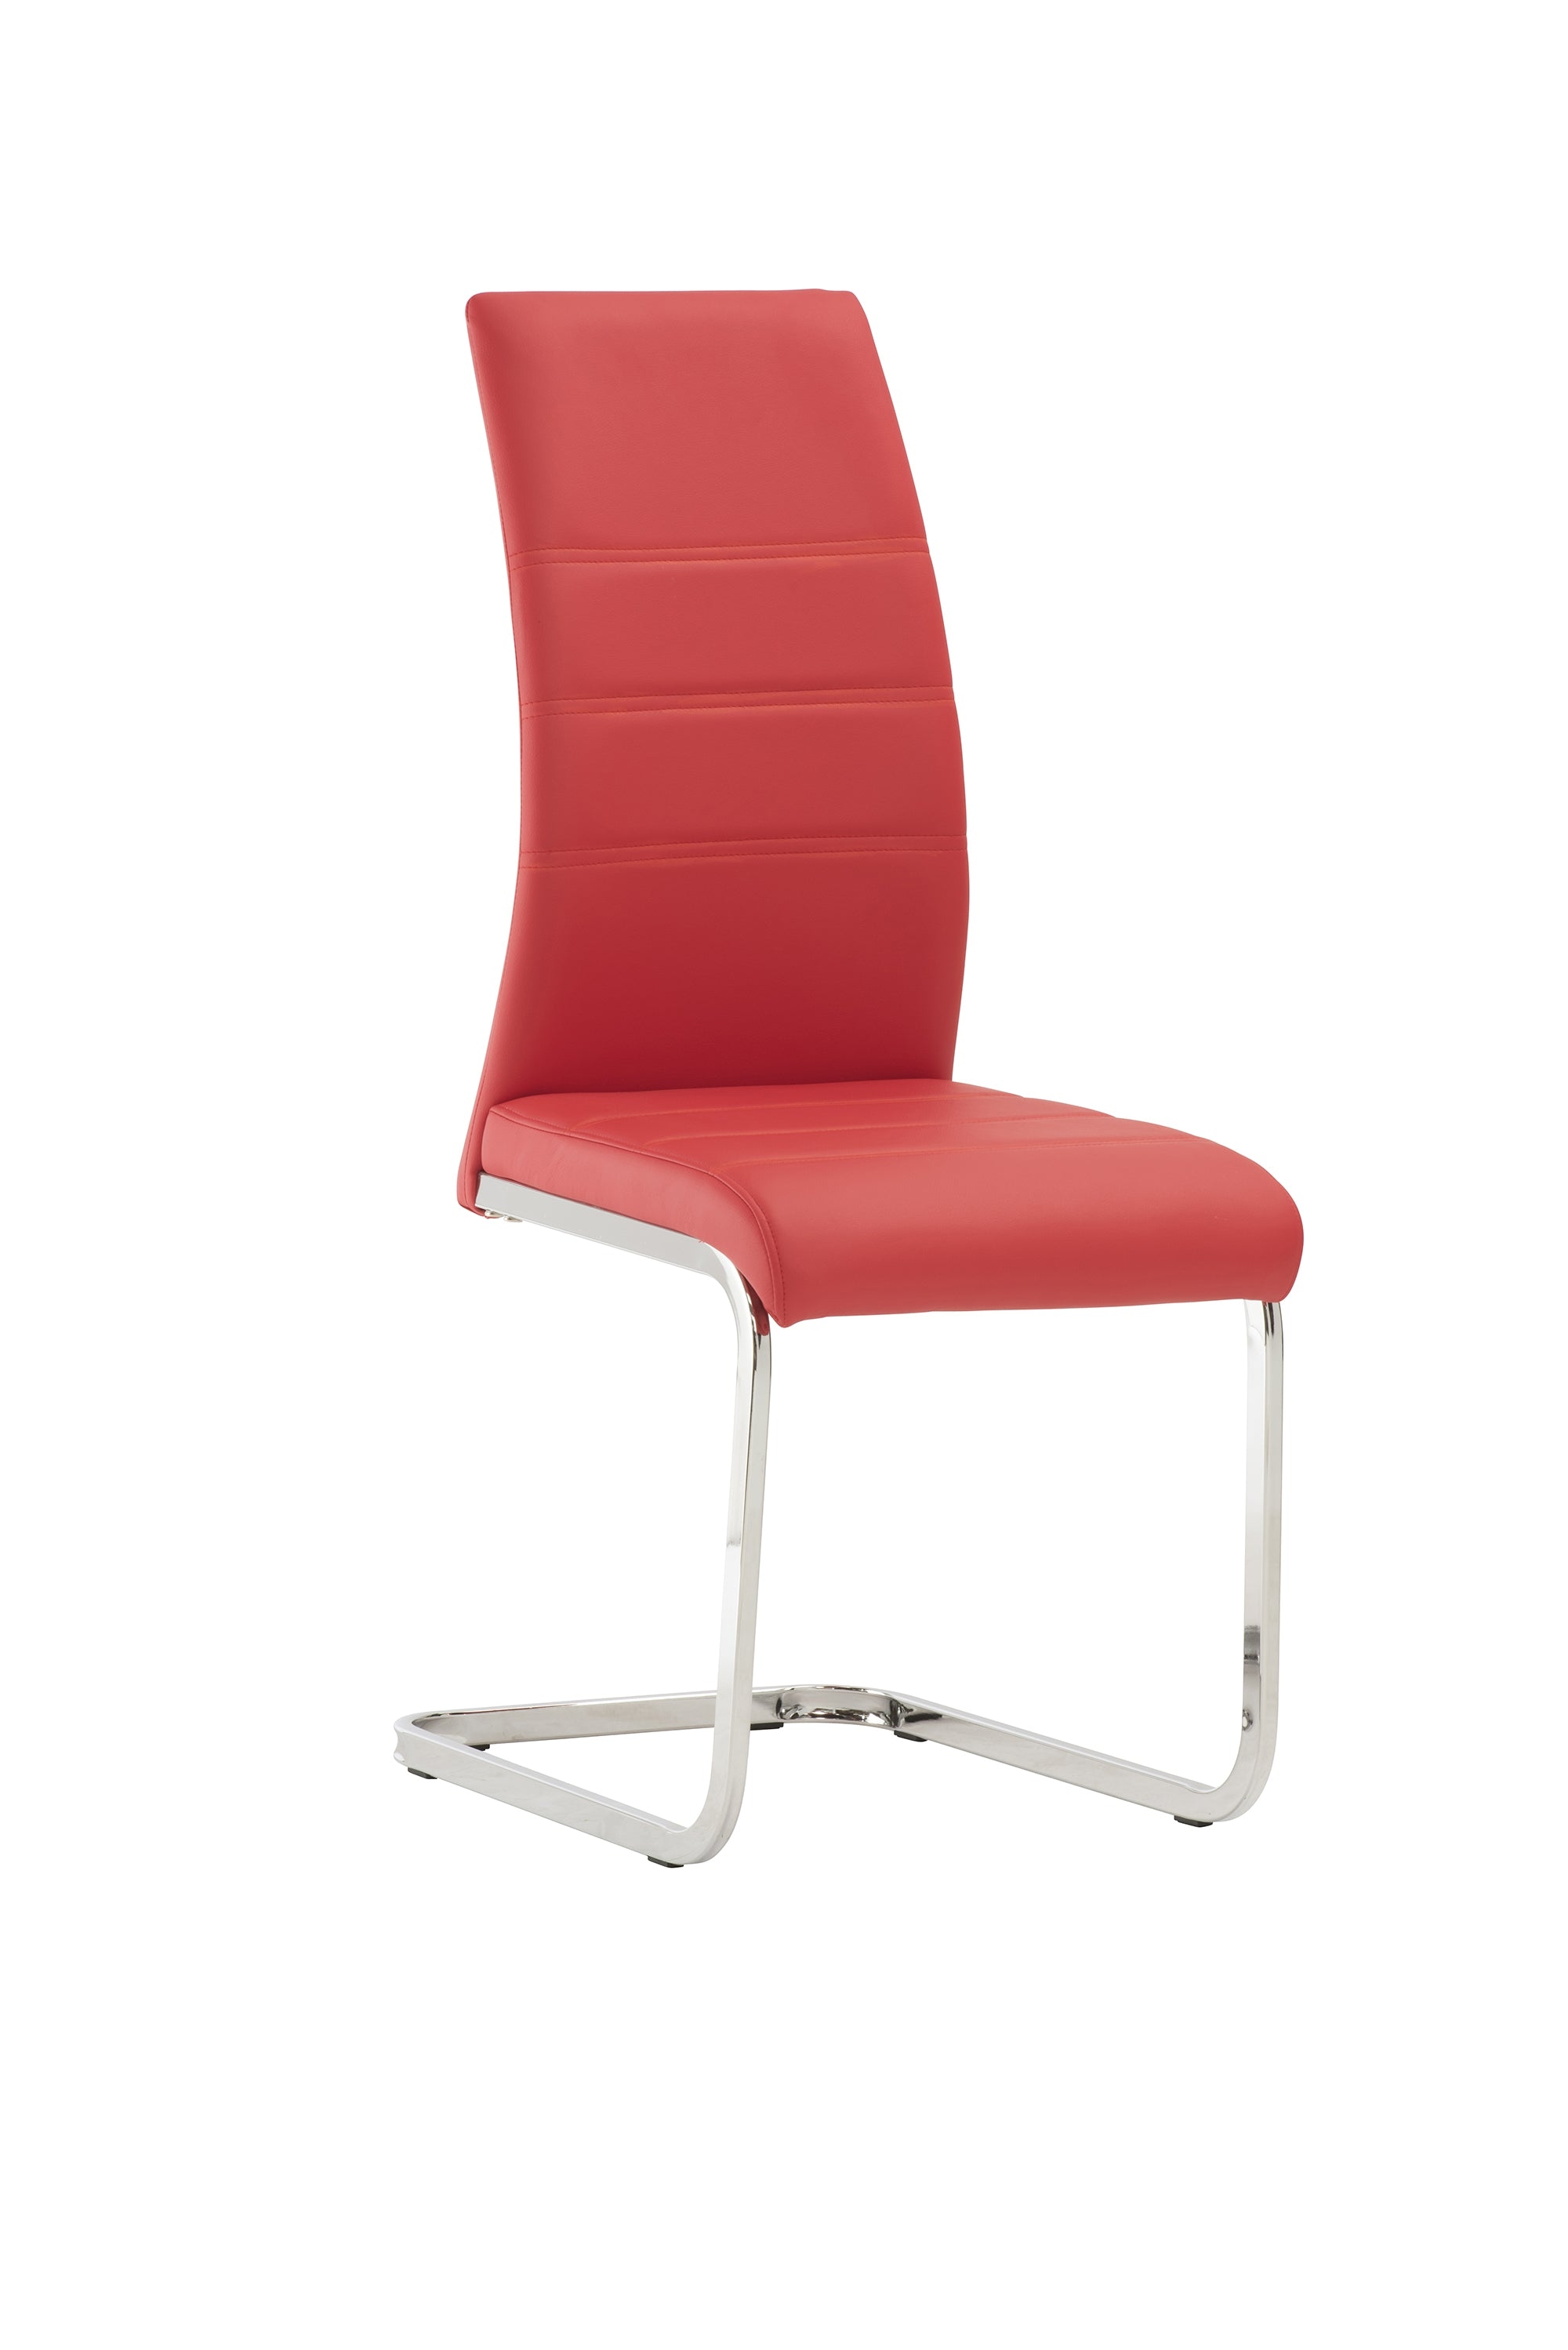 Soho Pu Cantilever Chairs (Pairs), Red – Lc Living